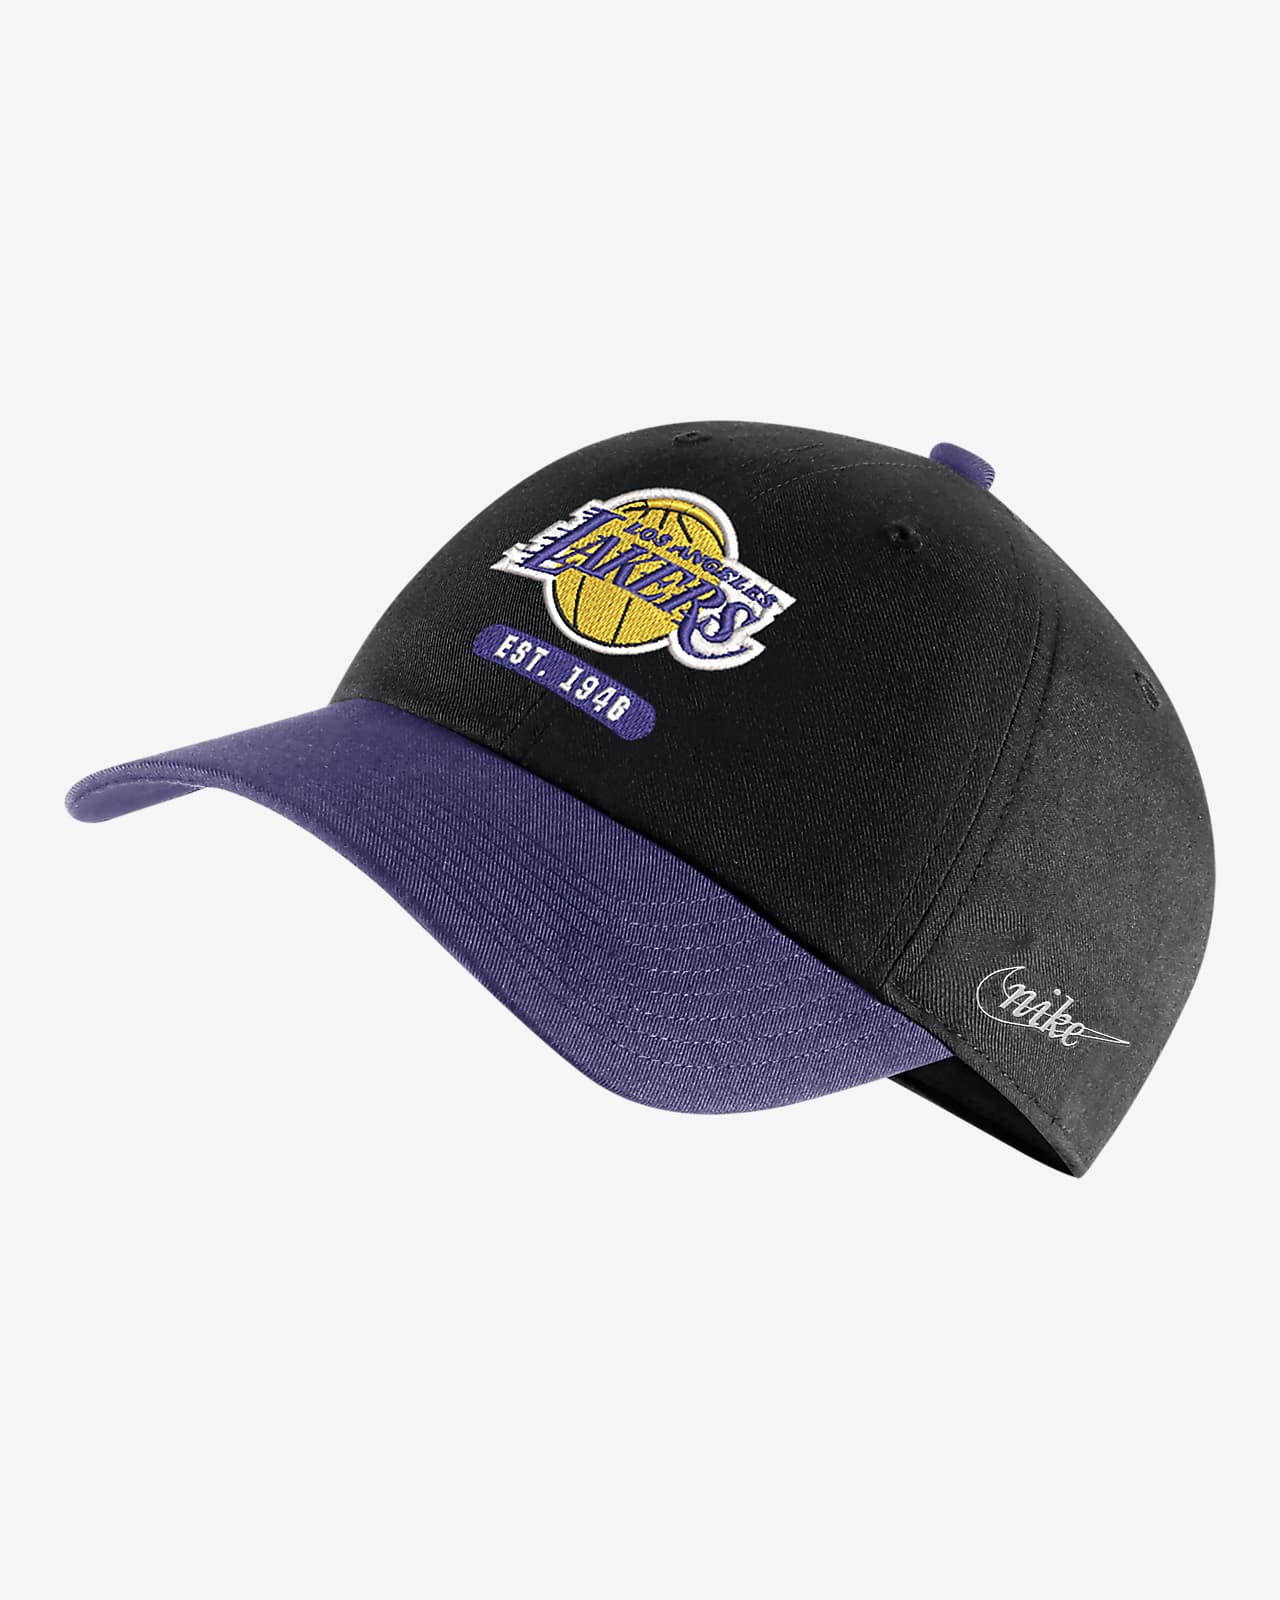 Los Angeles Lakers Heritage86 Icon Edition Nike NBA Cap